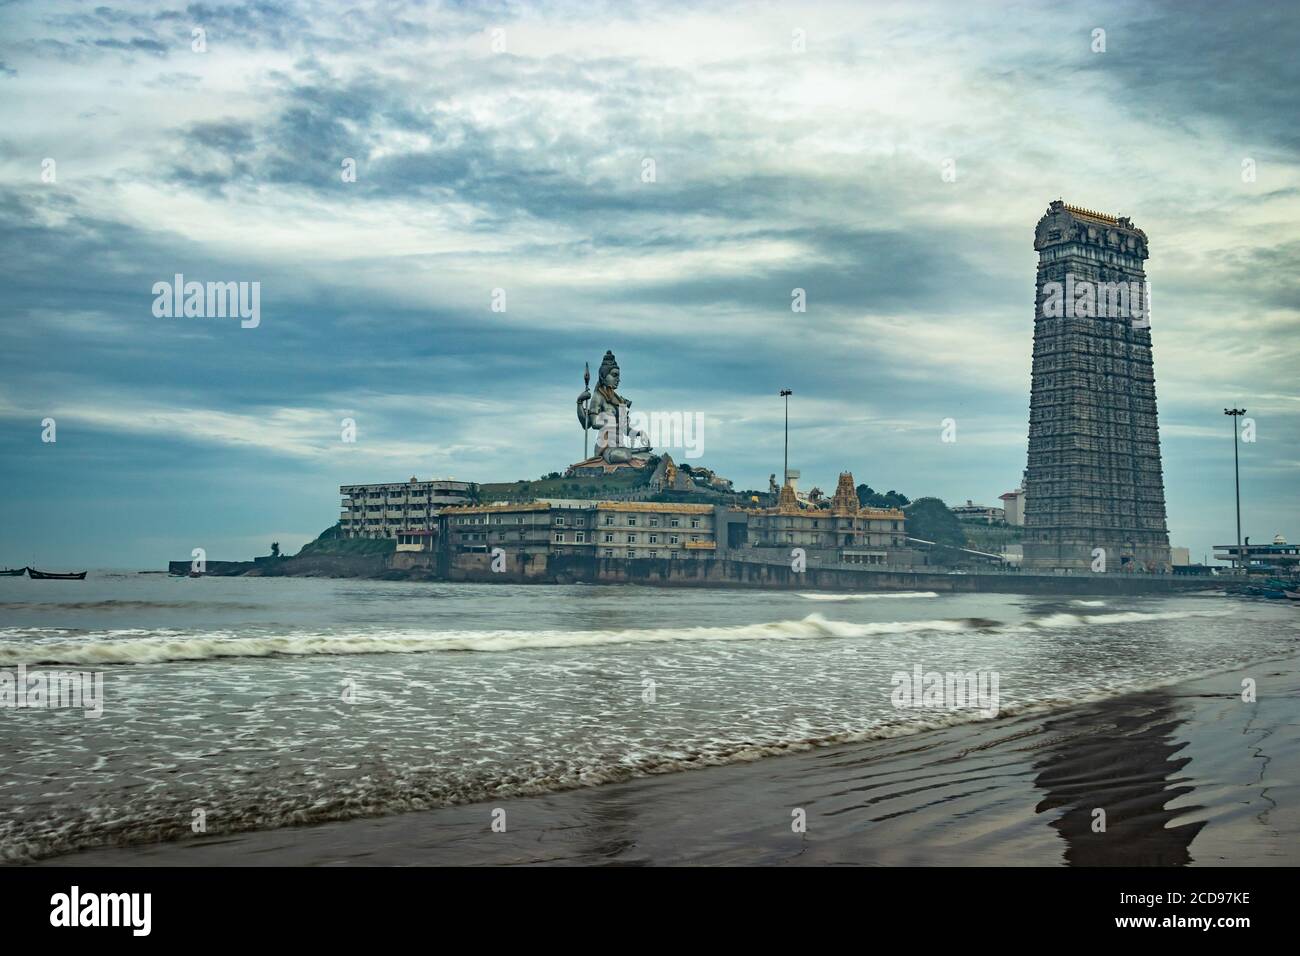 murdeshwar temple early morning view from low angle with sea waves image is taken at murudeshwar karnataka india at early morning. it is the house of Stock Photo